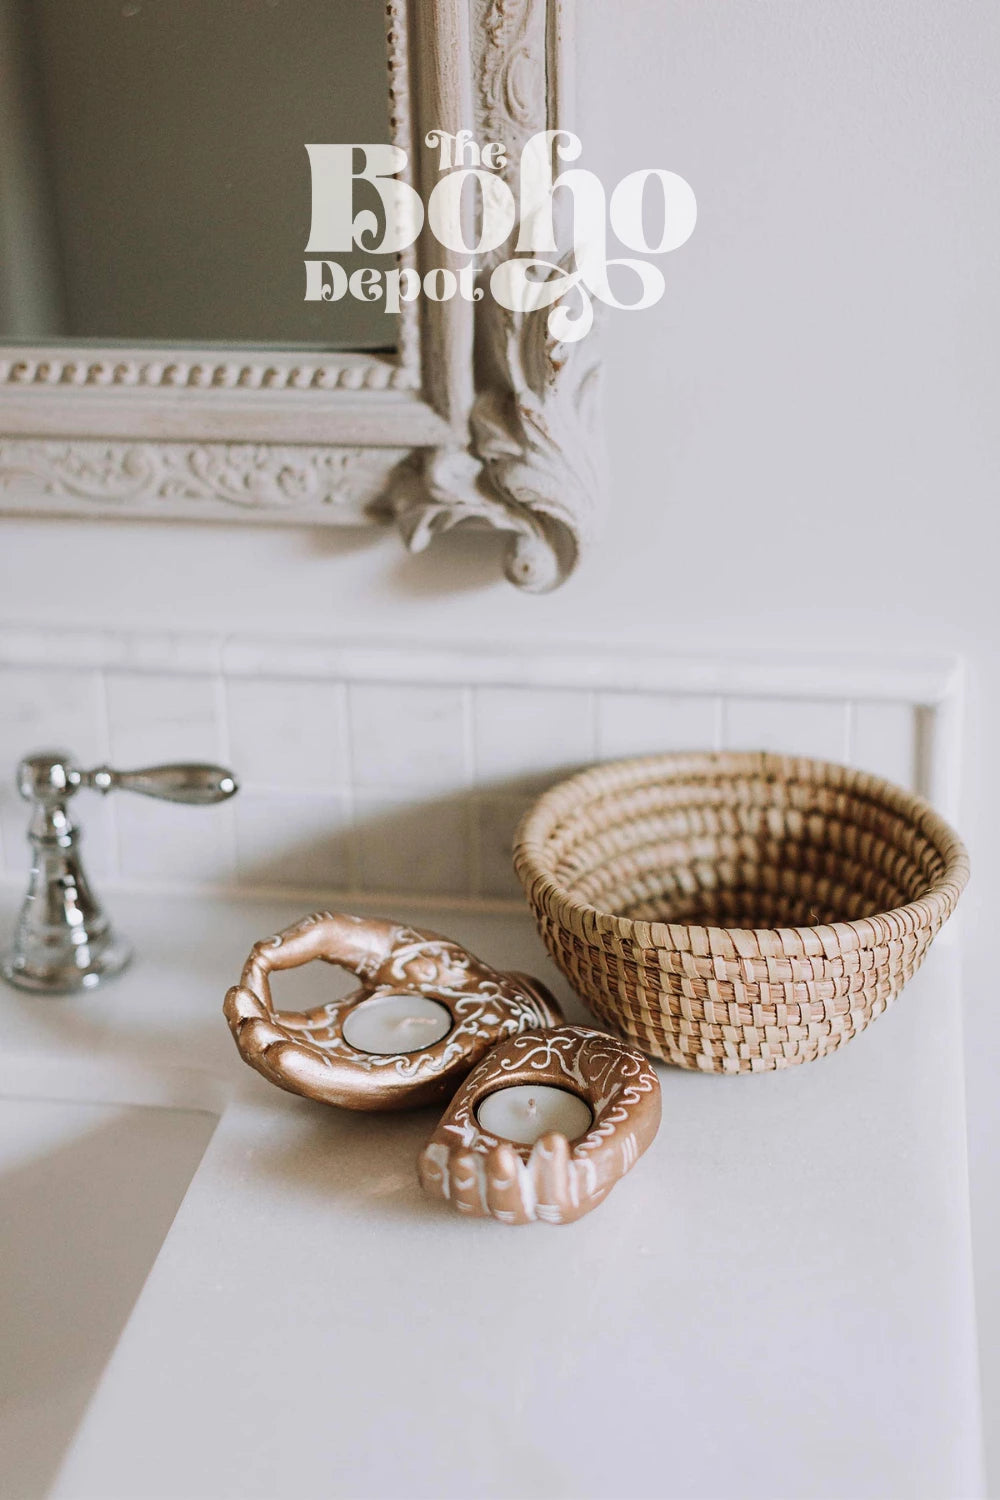 Candles & Home Fragrance - The Boho Depot